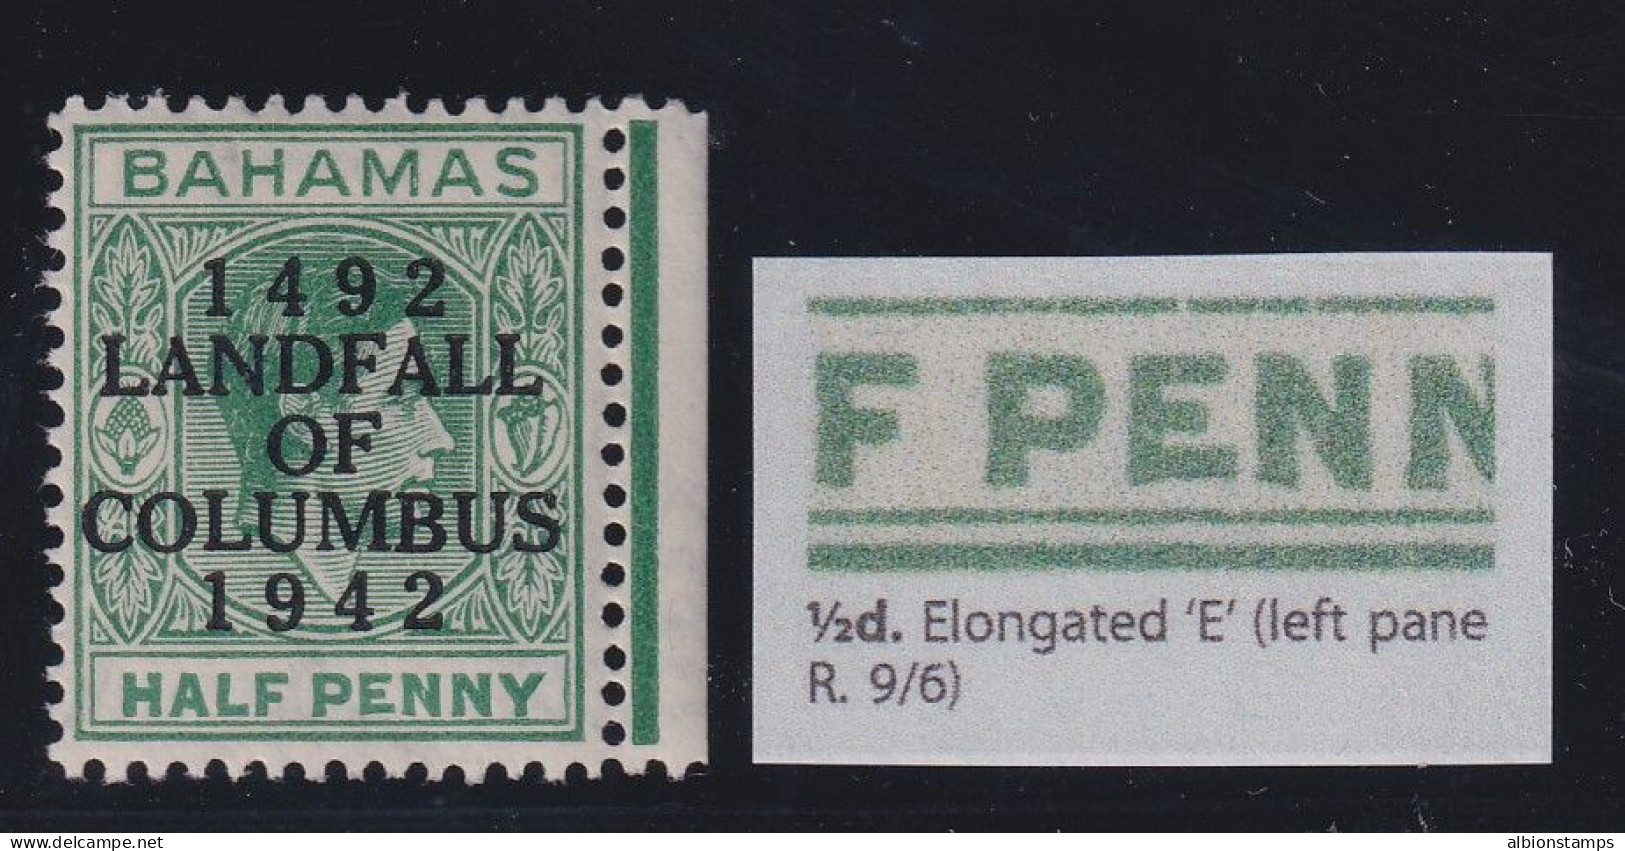 Bahamas, SG 162a, MNH Selvage "Elongated E" Variety - 1859-1963 Crown Colony